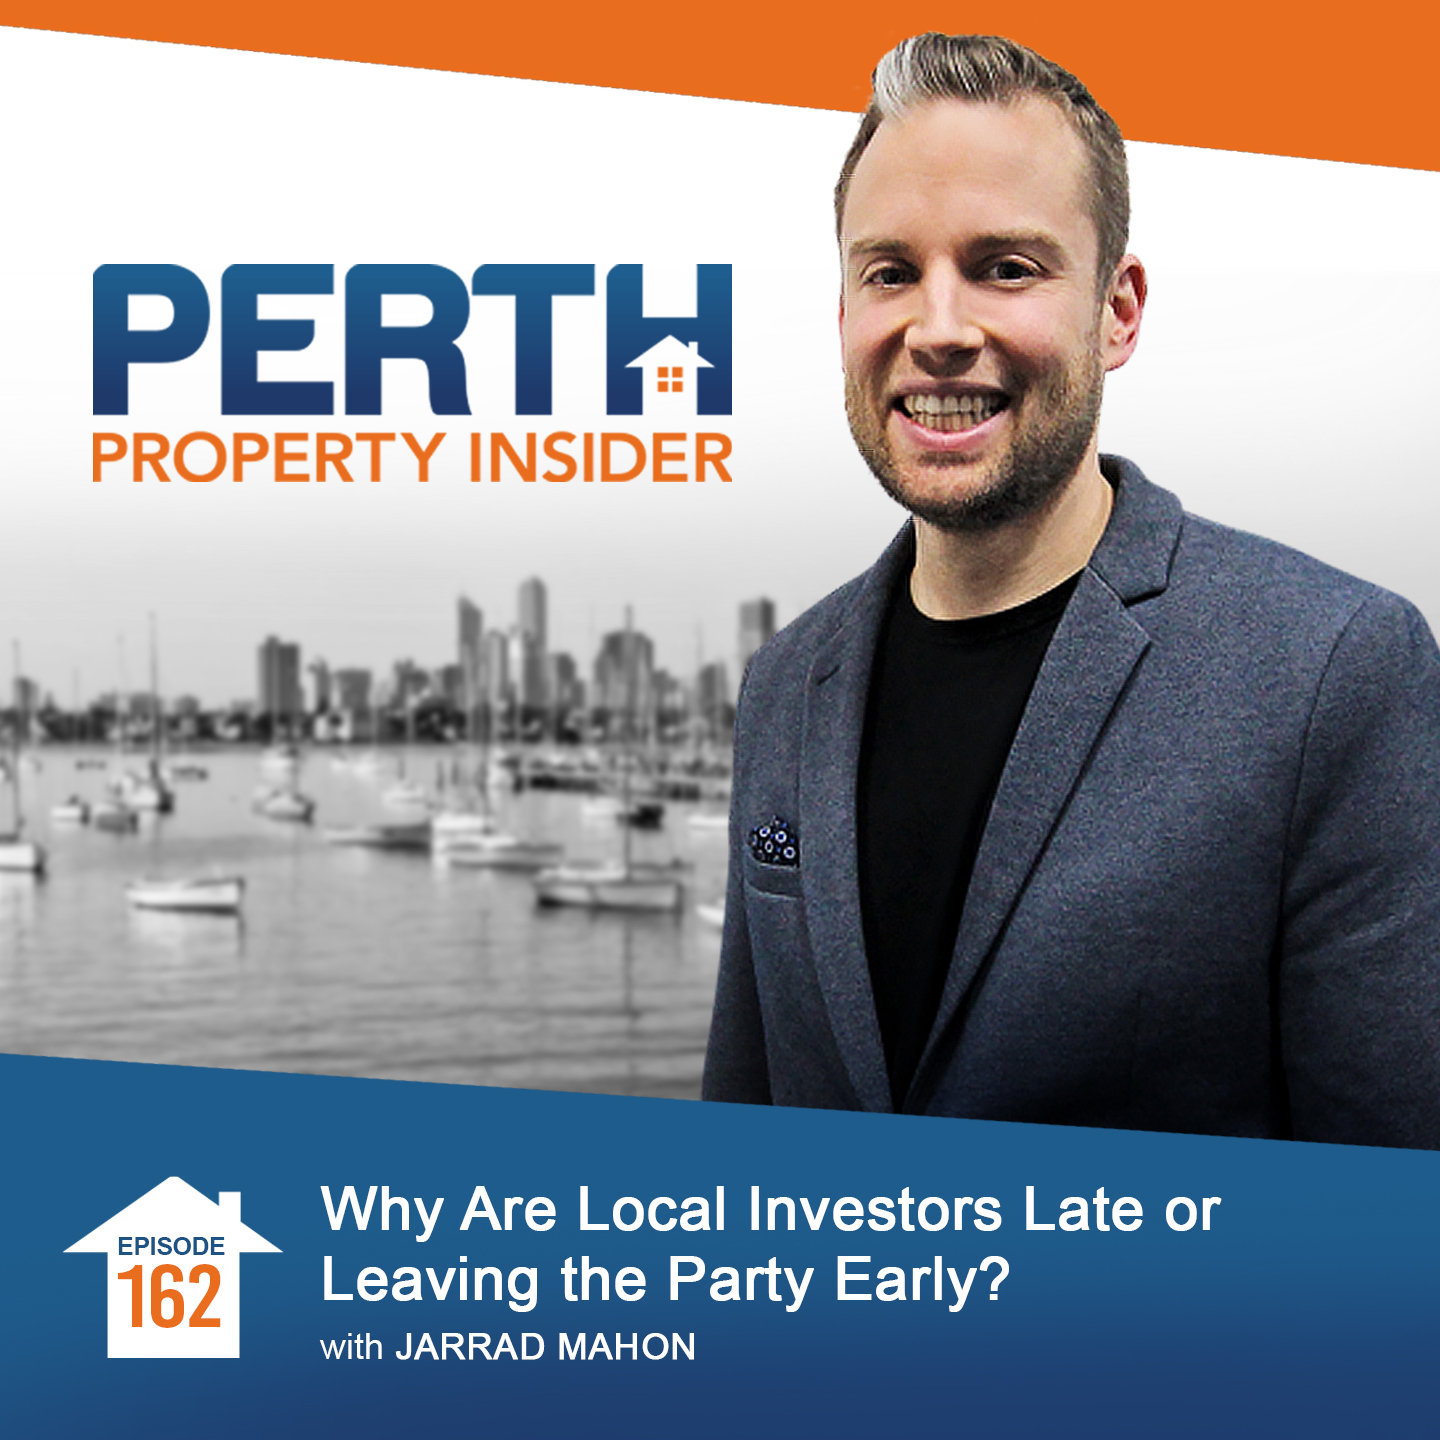 Why Are Local Investors Late or Leaving the Party Early?